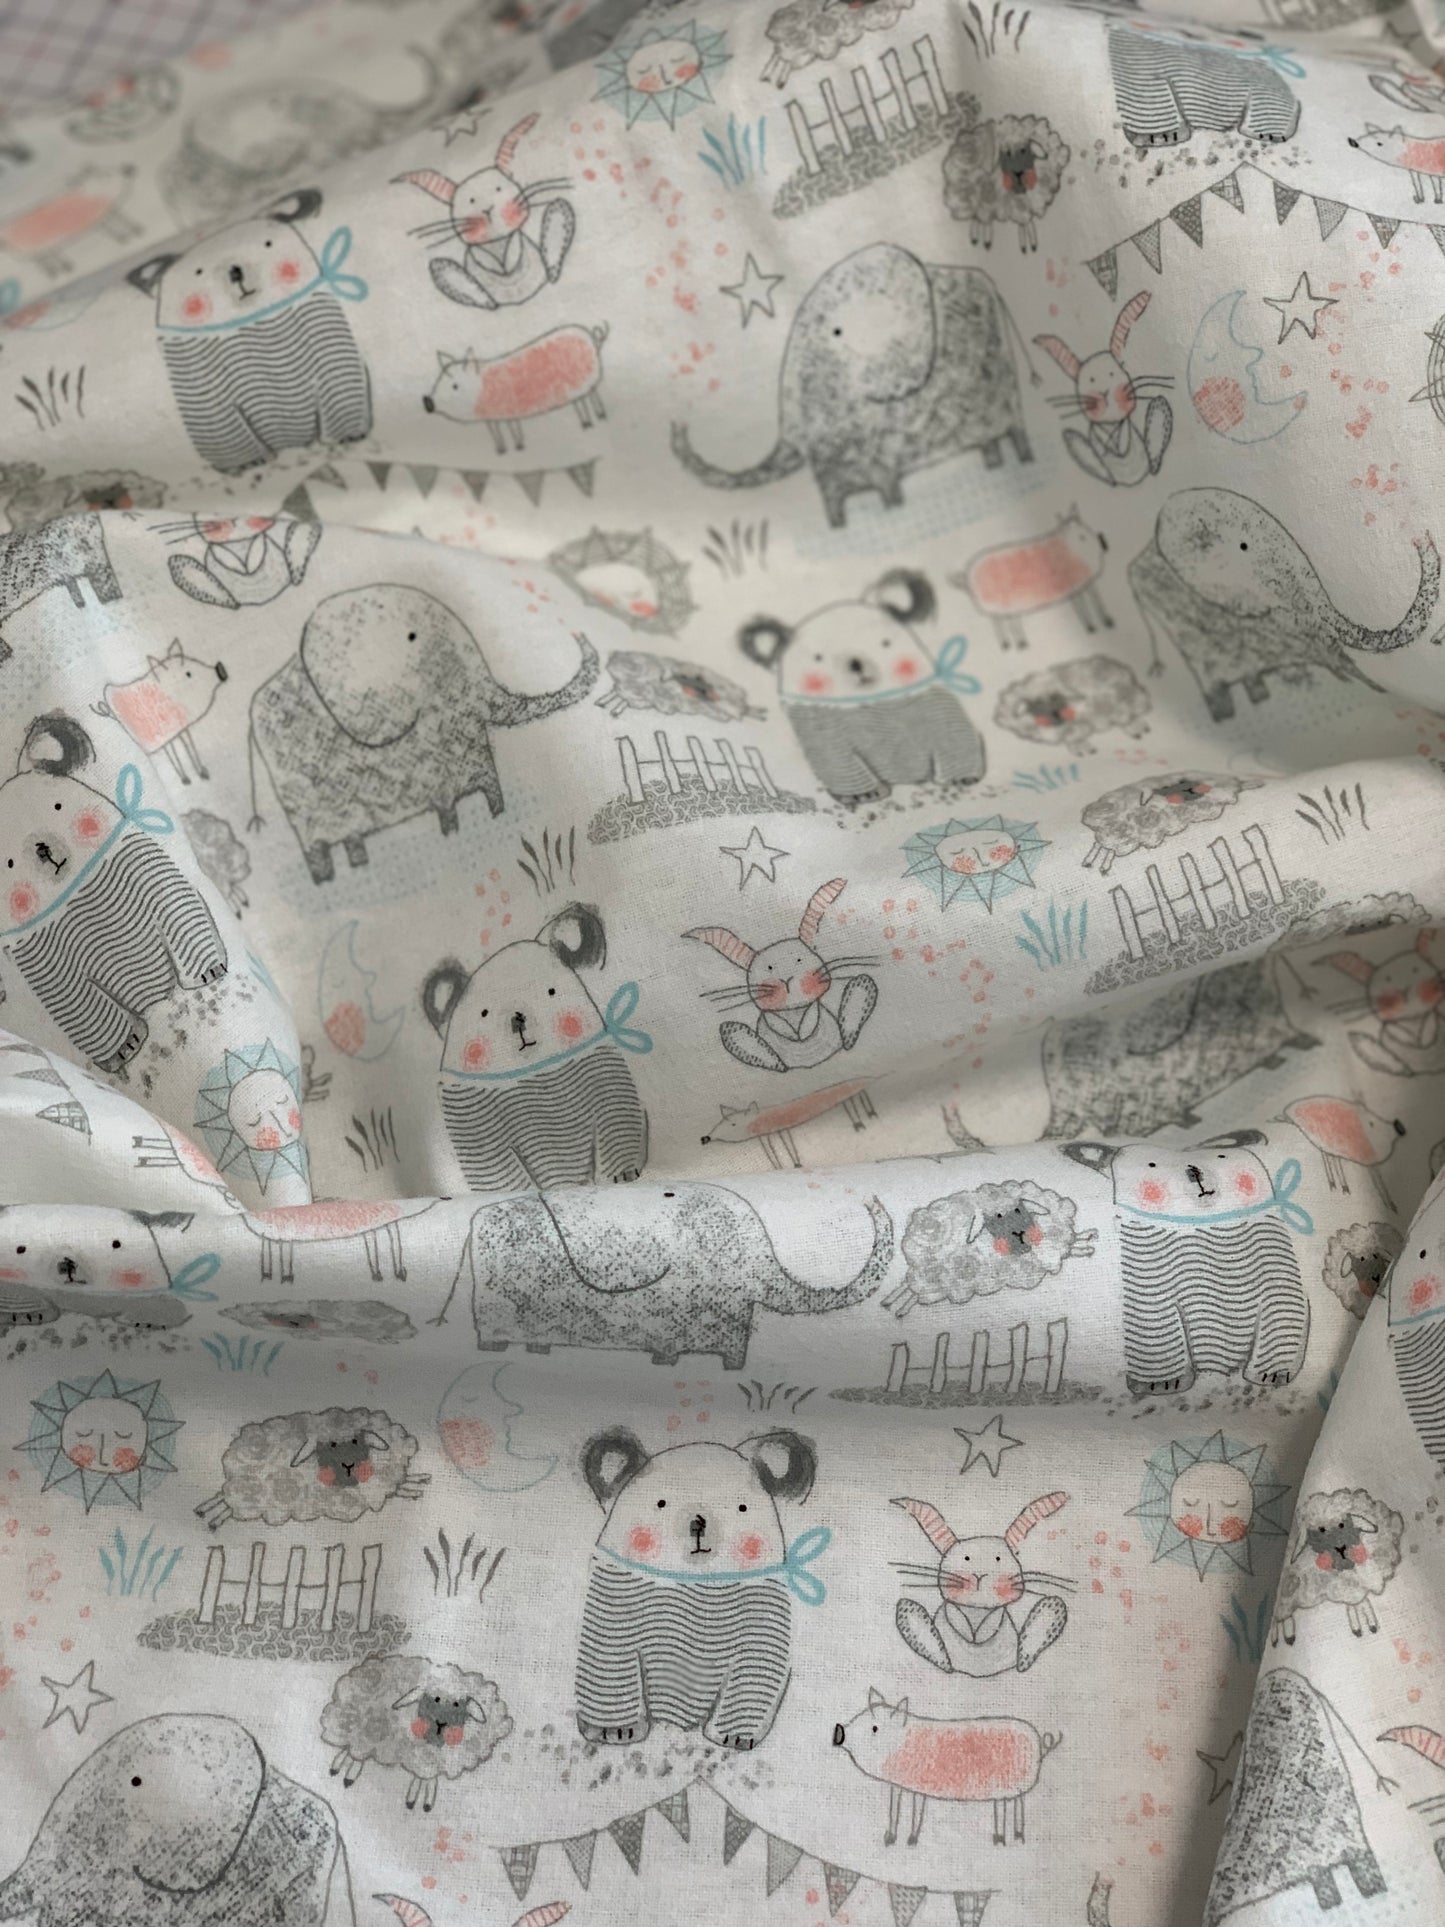 Coming Back in stock soon - Flannel - Comfy Flannel - White Elephant, Bear, Pigs, Bunny & Sheep